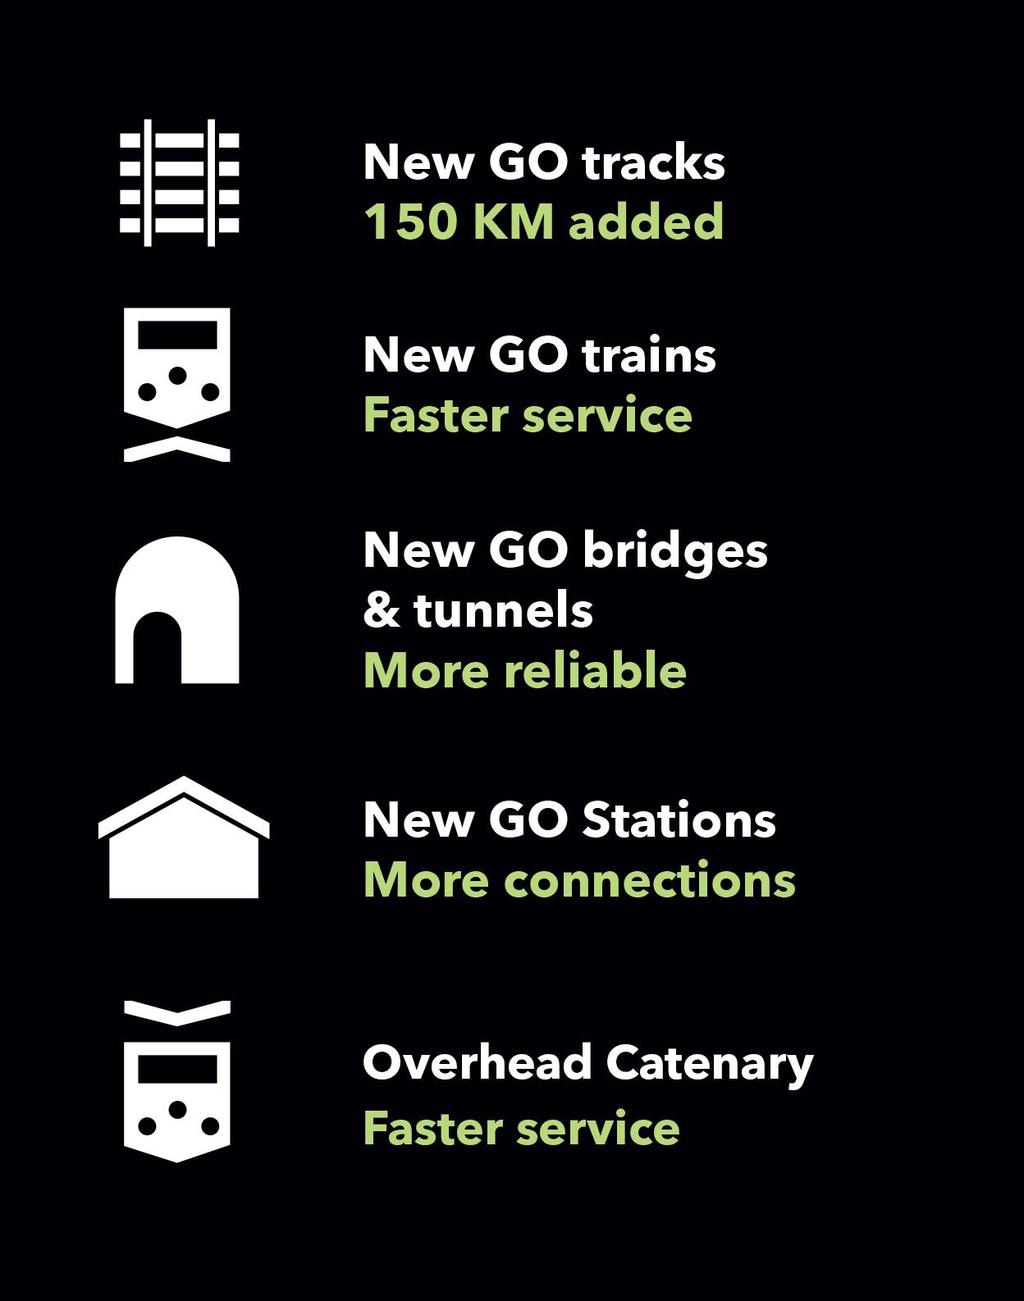 GO RAIL EXPANSION 150 kilometers of new dedicated GO track will allow for more uninterrupted service. New electric trains will travel faster for longer and reduce travel times.